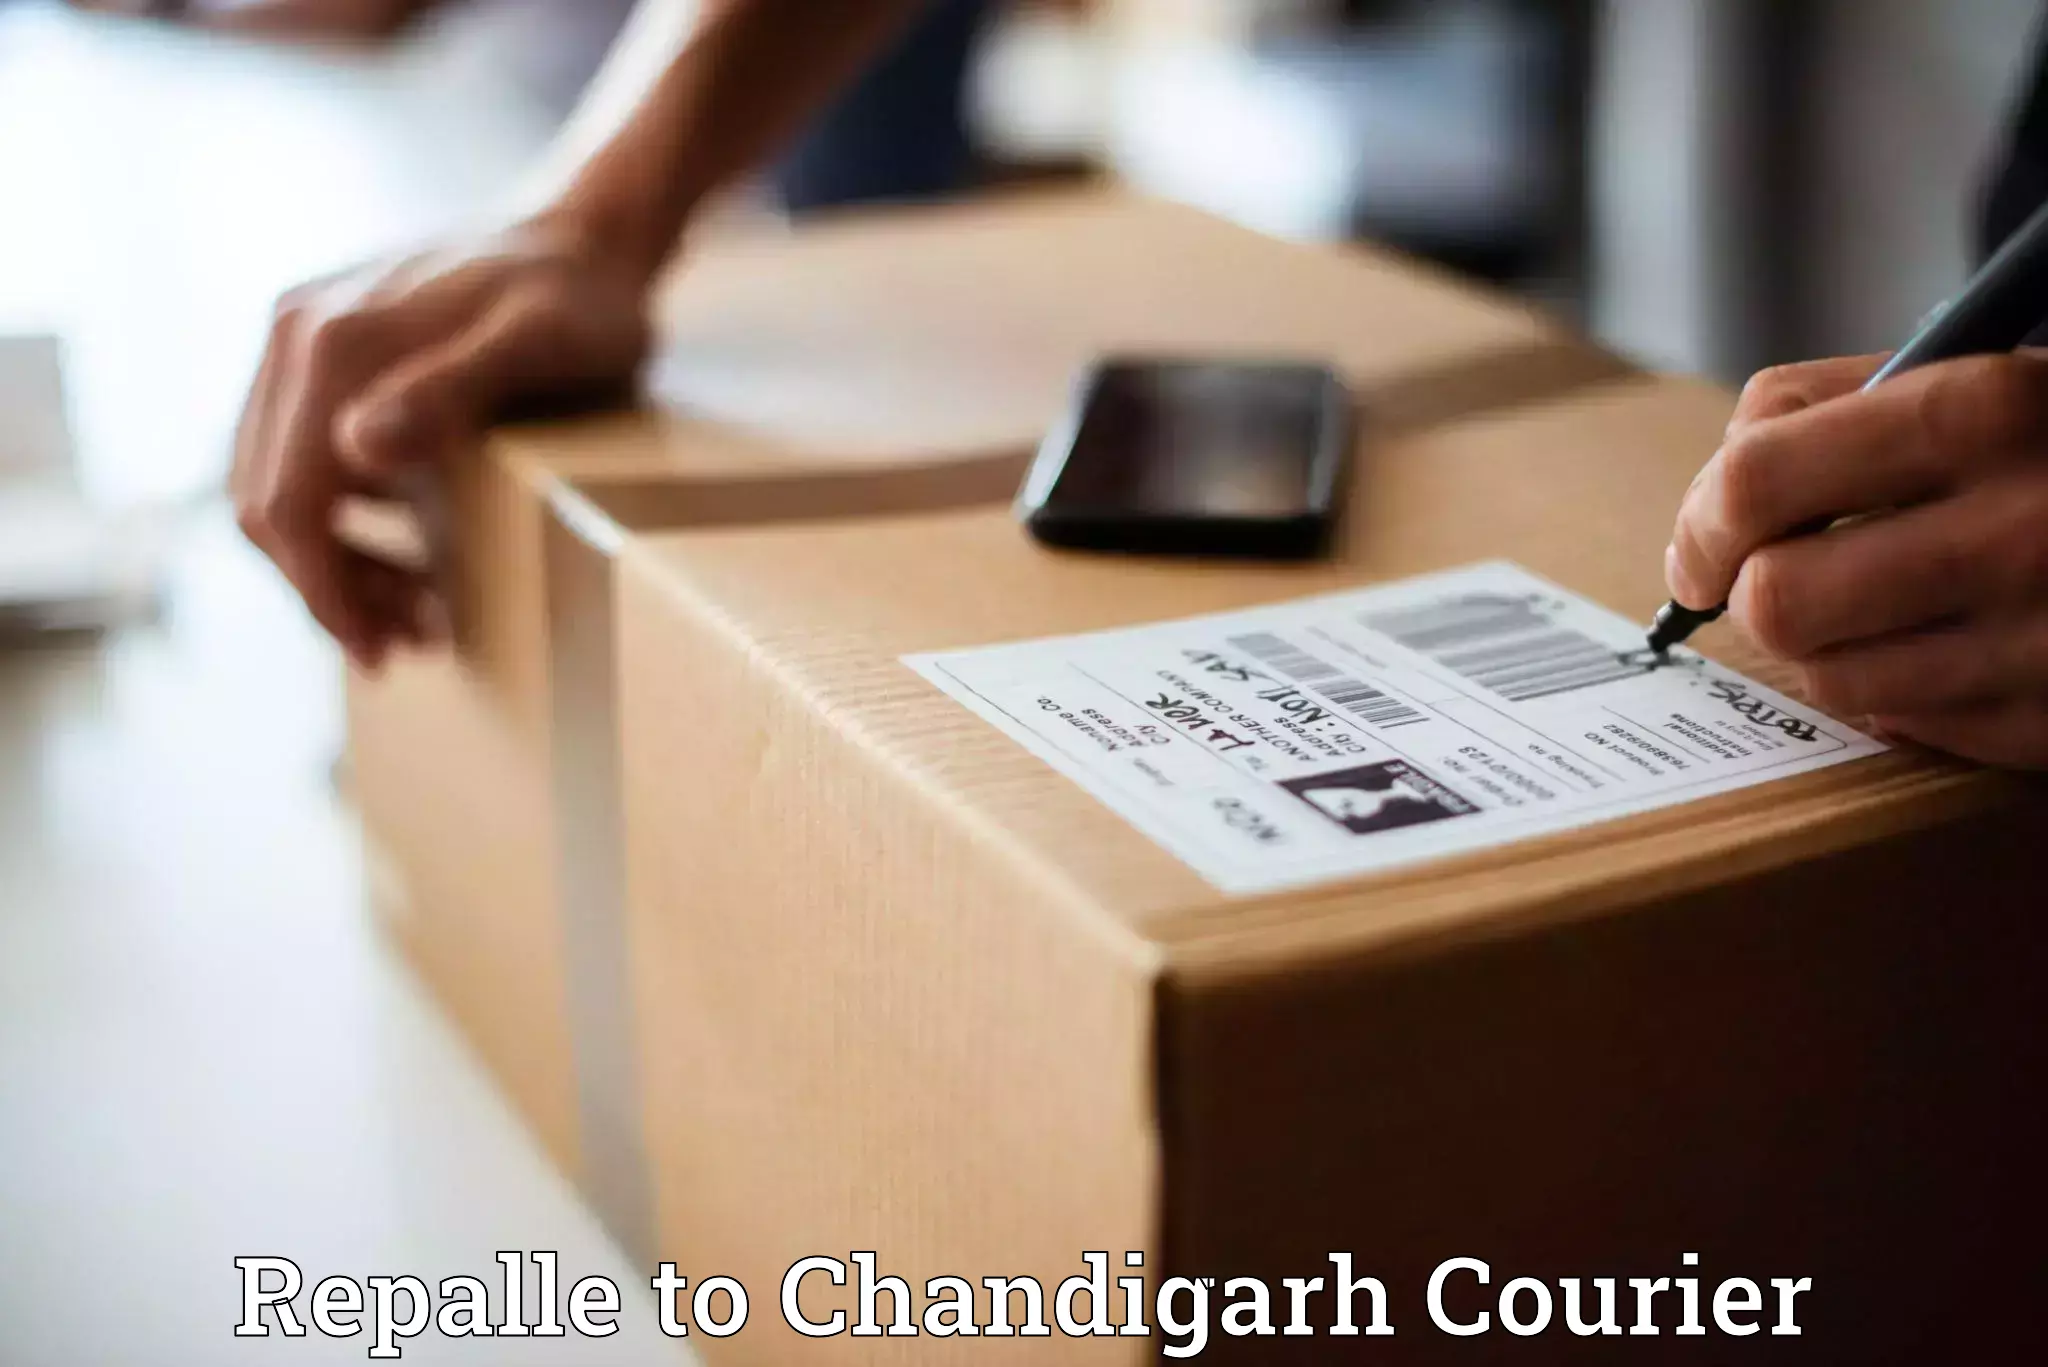 Specialized courier services Repalle to Chandigarh